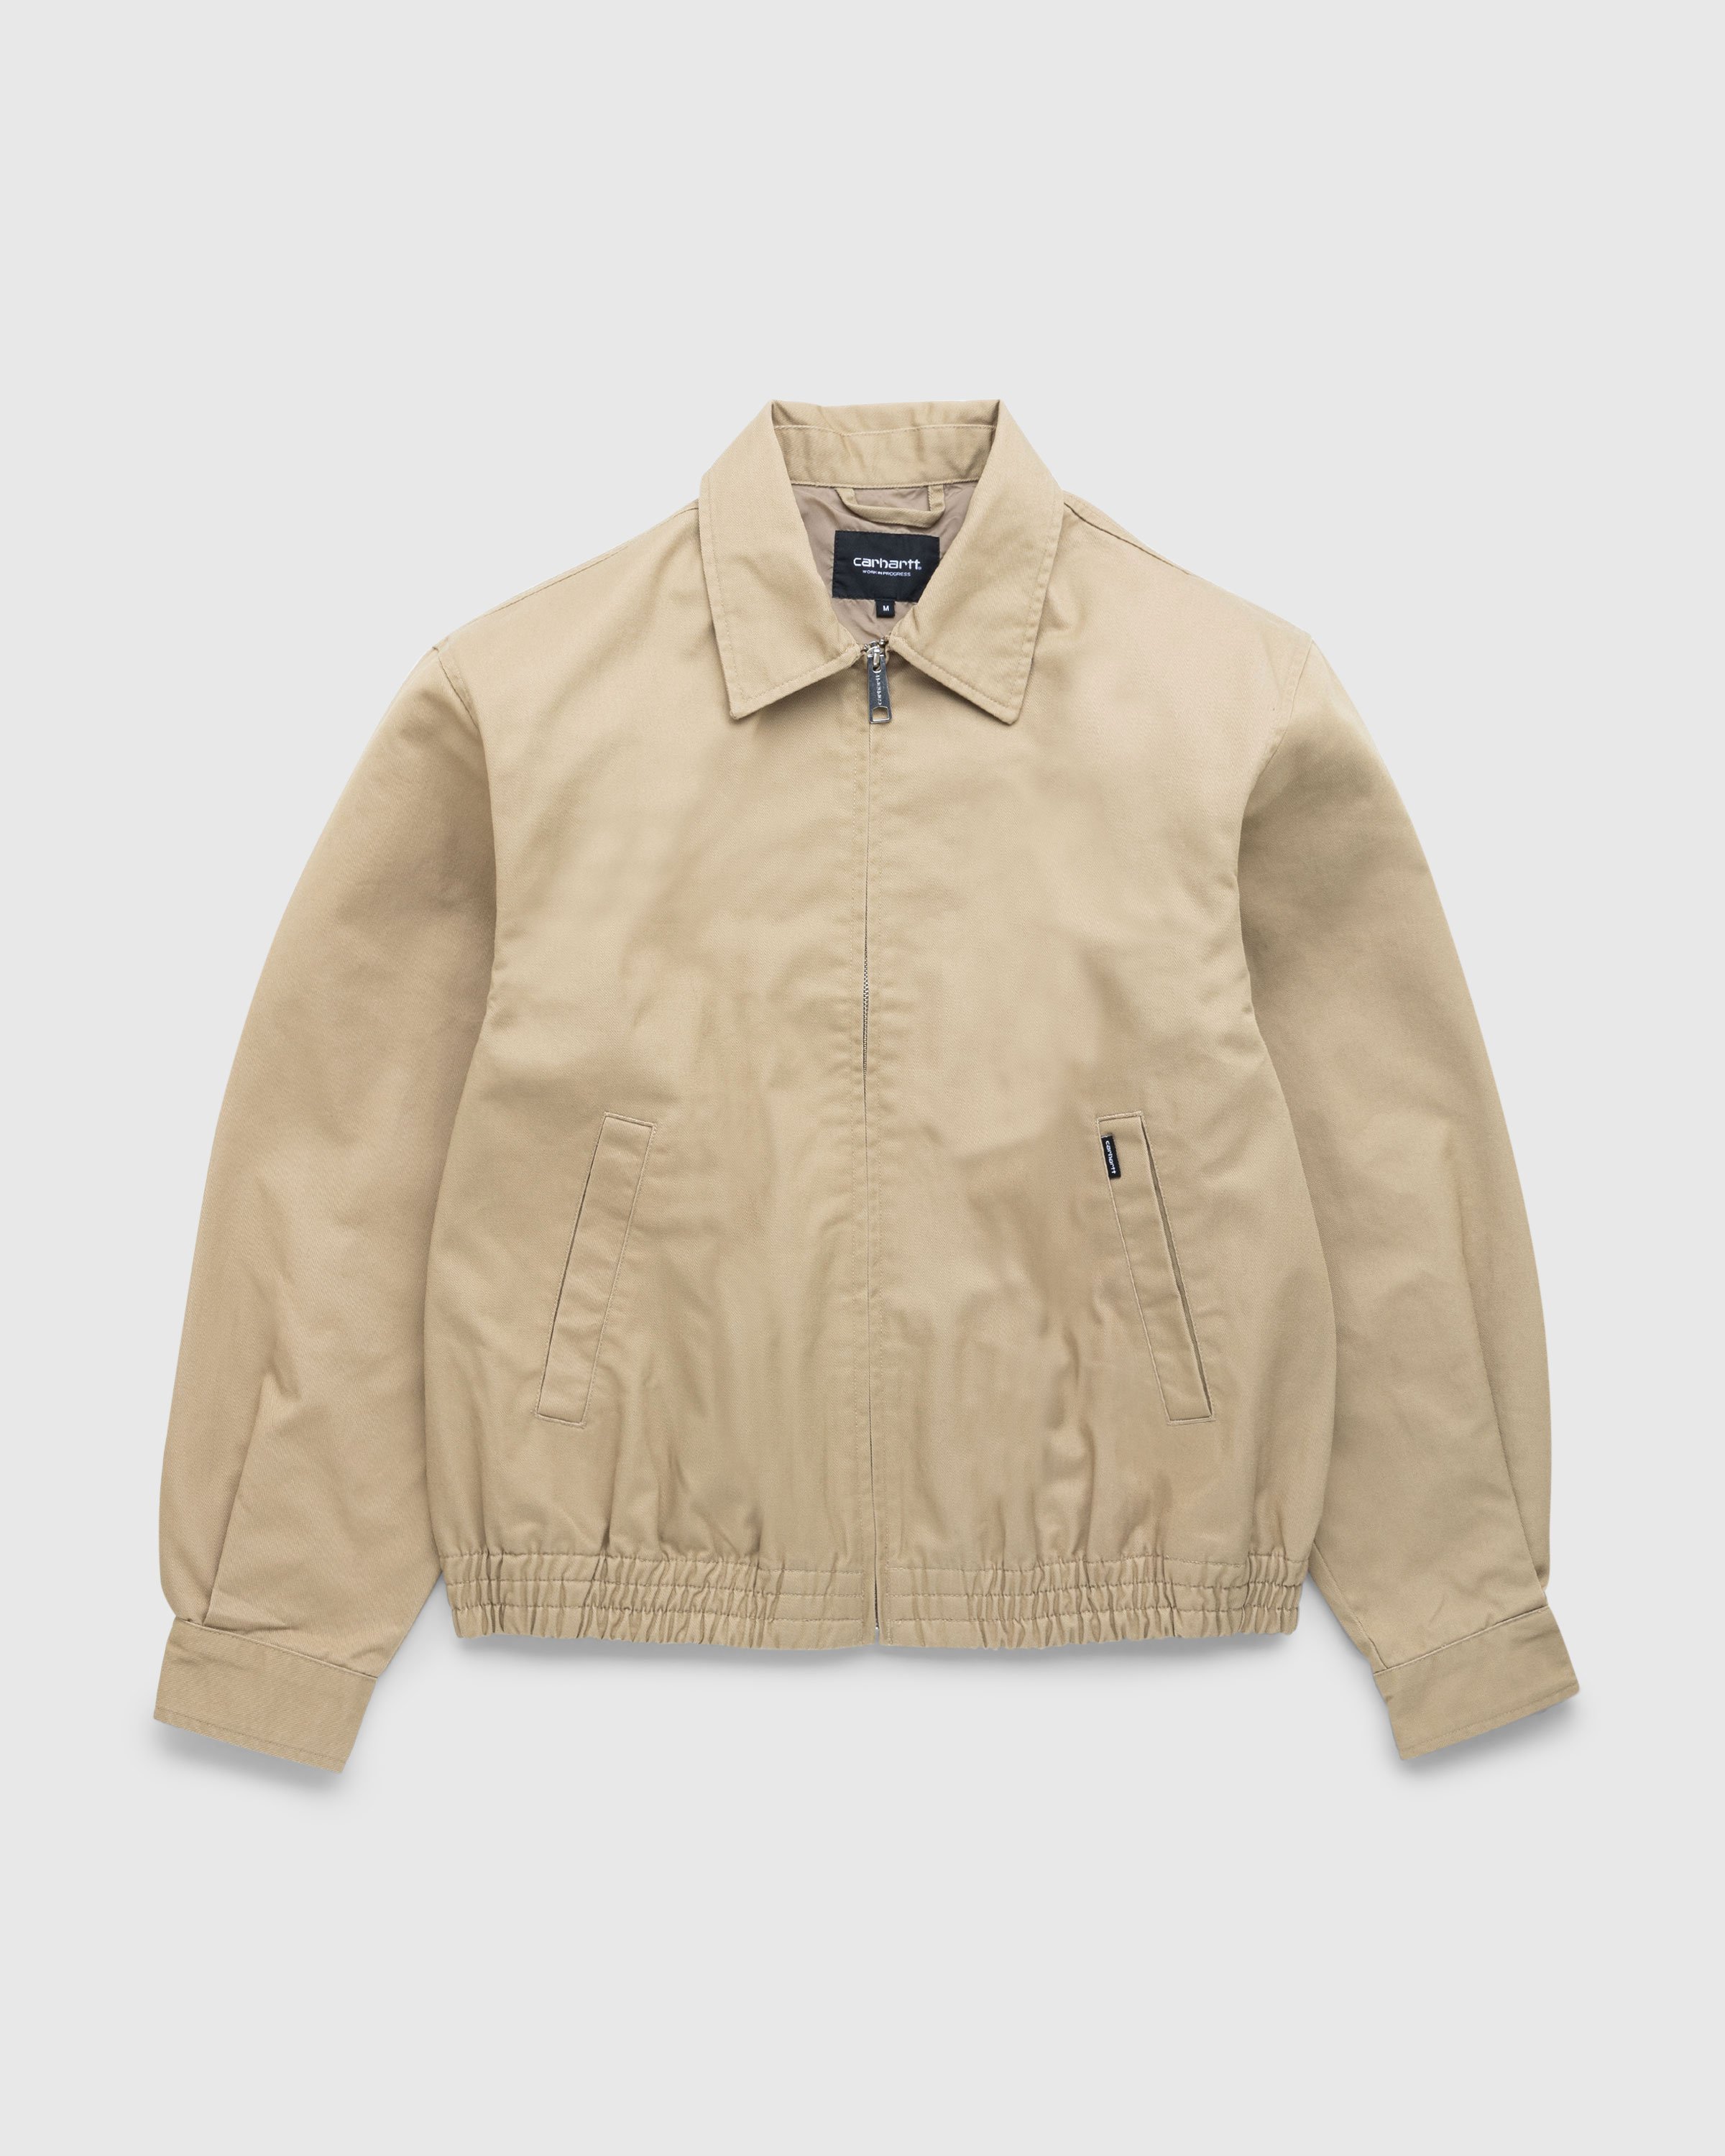 Carhartt WIP - Newhaven Jacket Sable/Rinsed - Clothing - Brown - Image 1